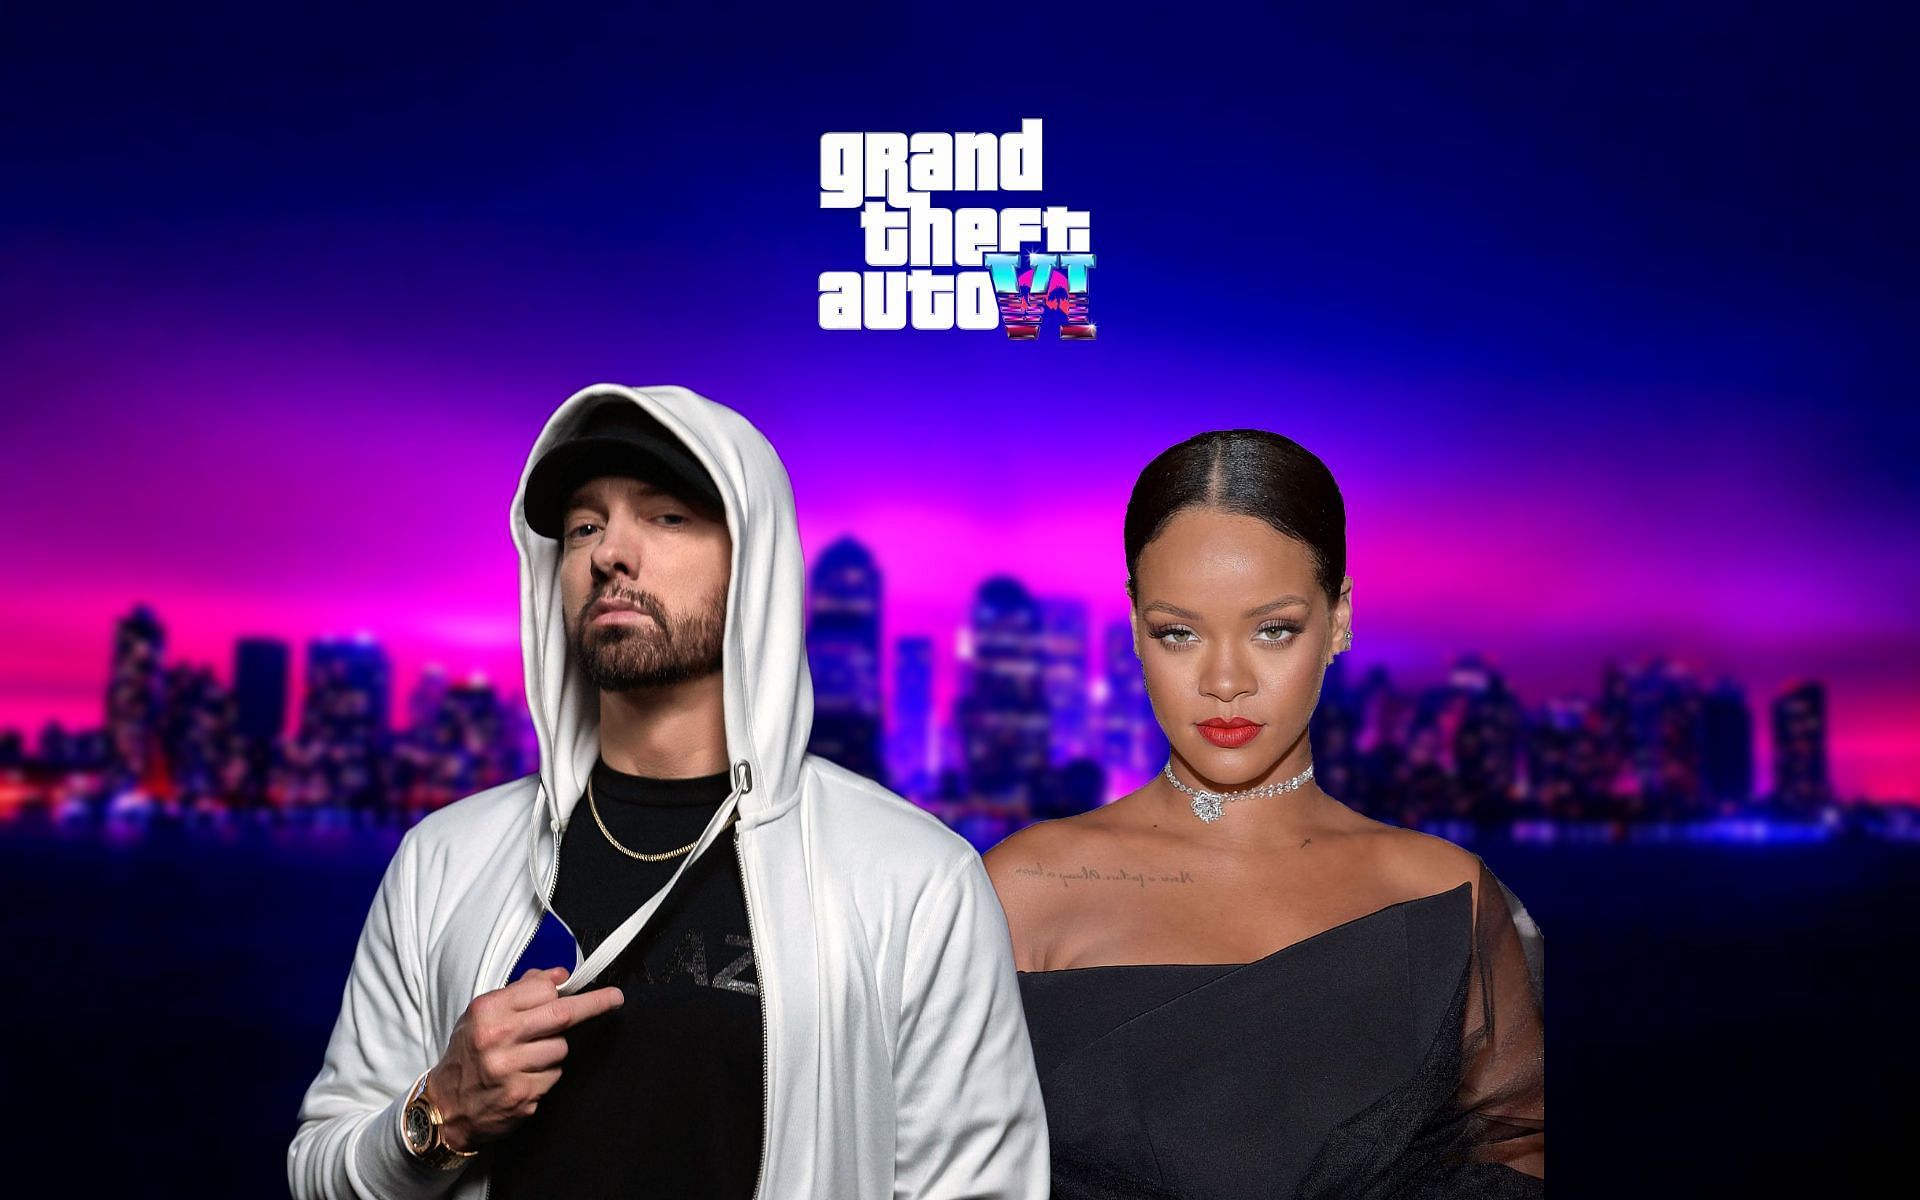 The song &quot;Numb&quot; by Rihanna and Eminem could appear in GTA 6 (Image via Sportskeeda)